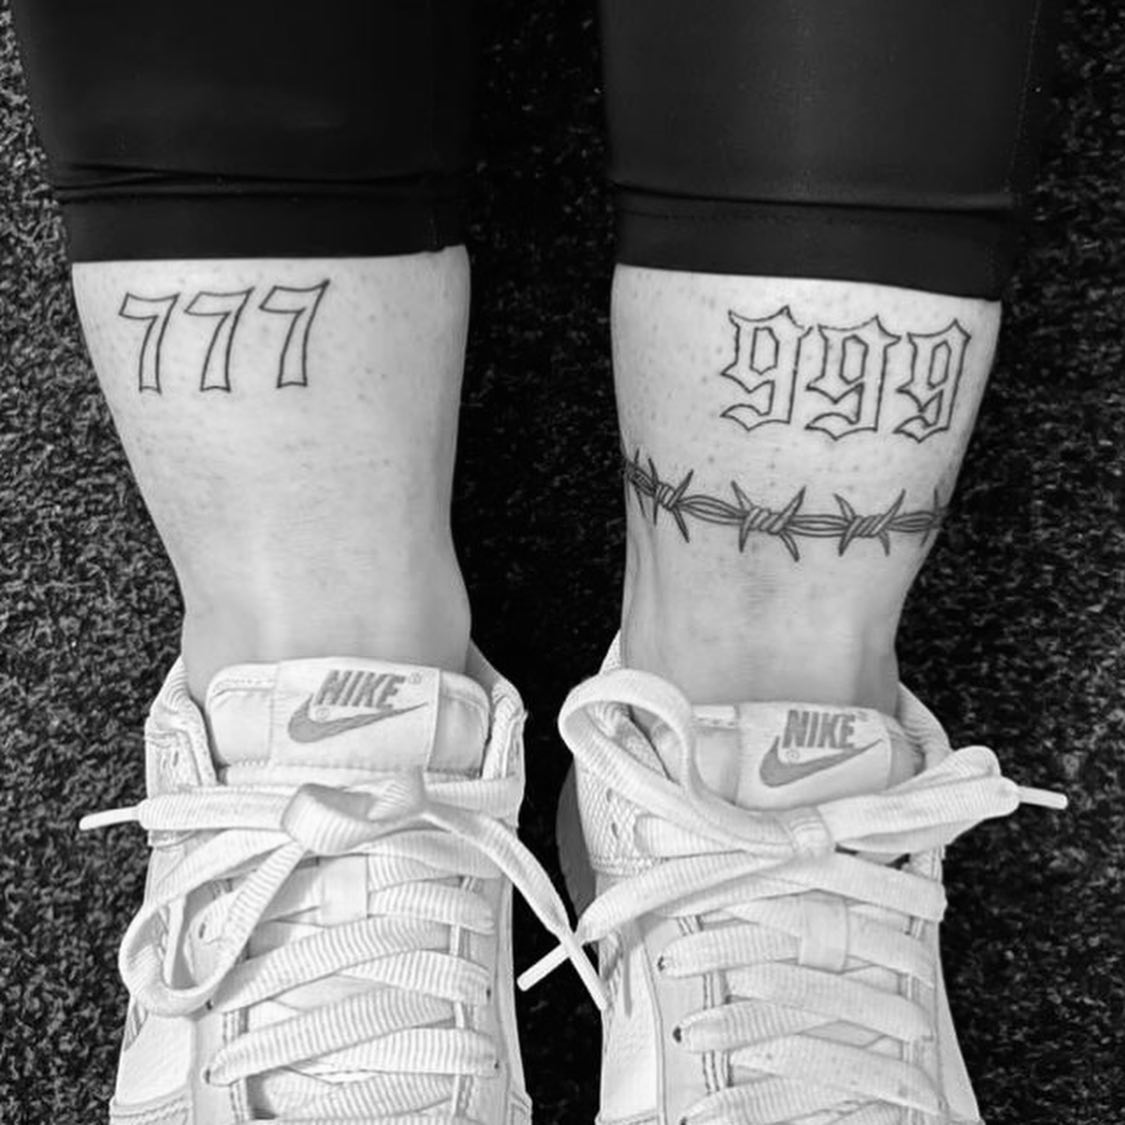 Do you know what these numbers symbolize? They are two of many angel numbers. The meaning of 777 is consciousness and helping people. 999 means enlightment, so it has a spiritual message. Have these angel numbers on your body forever and protect these numbers with a barbed wire.